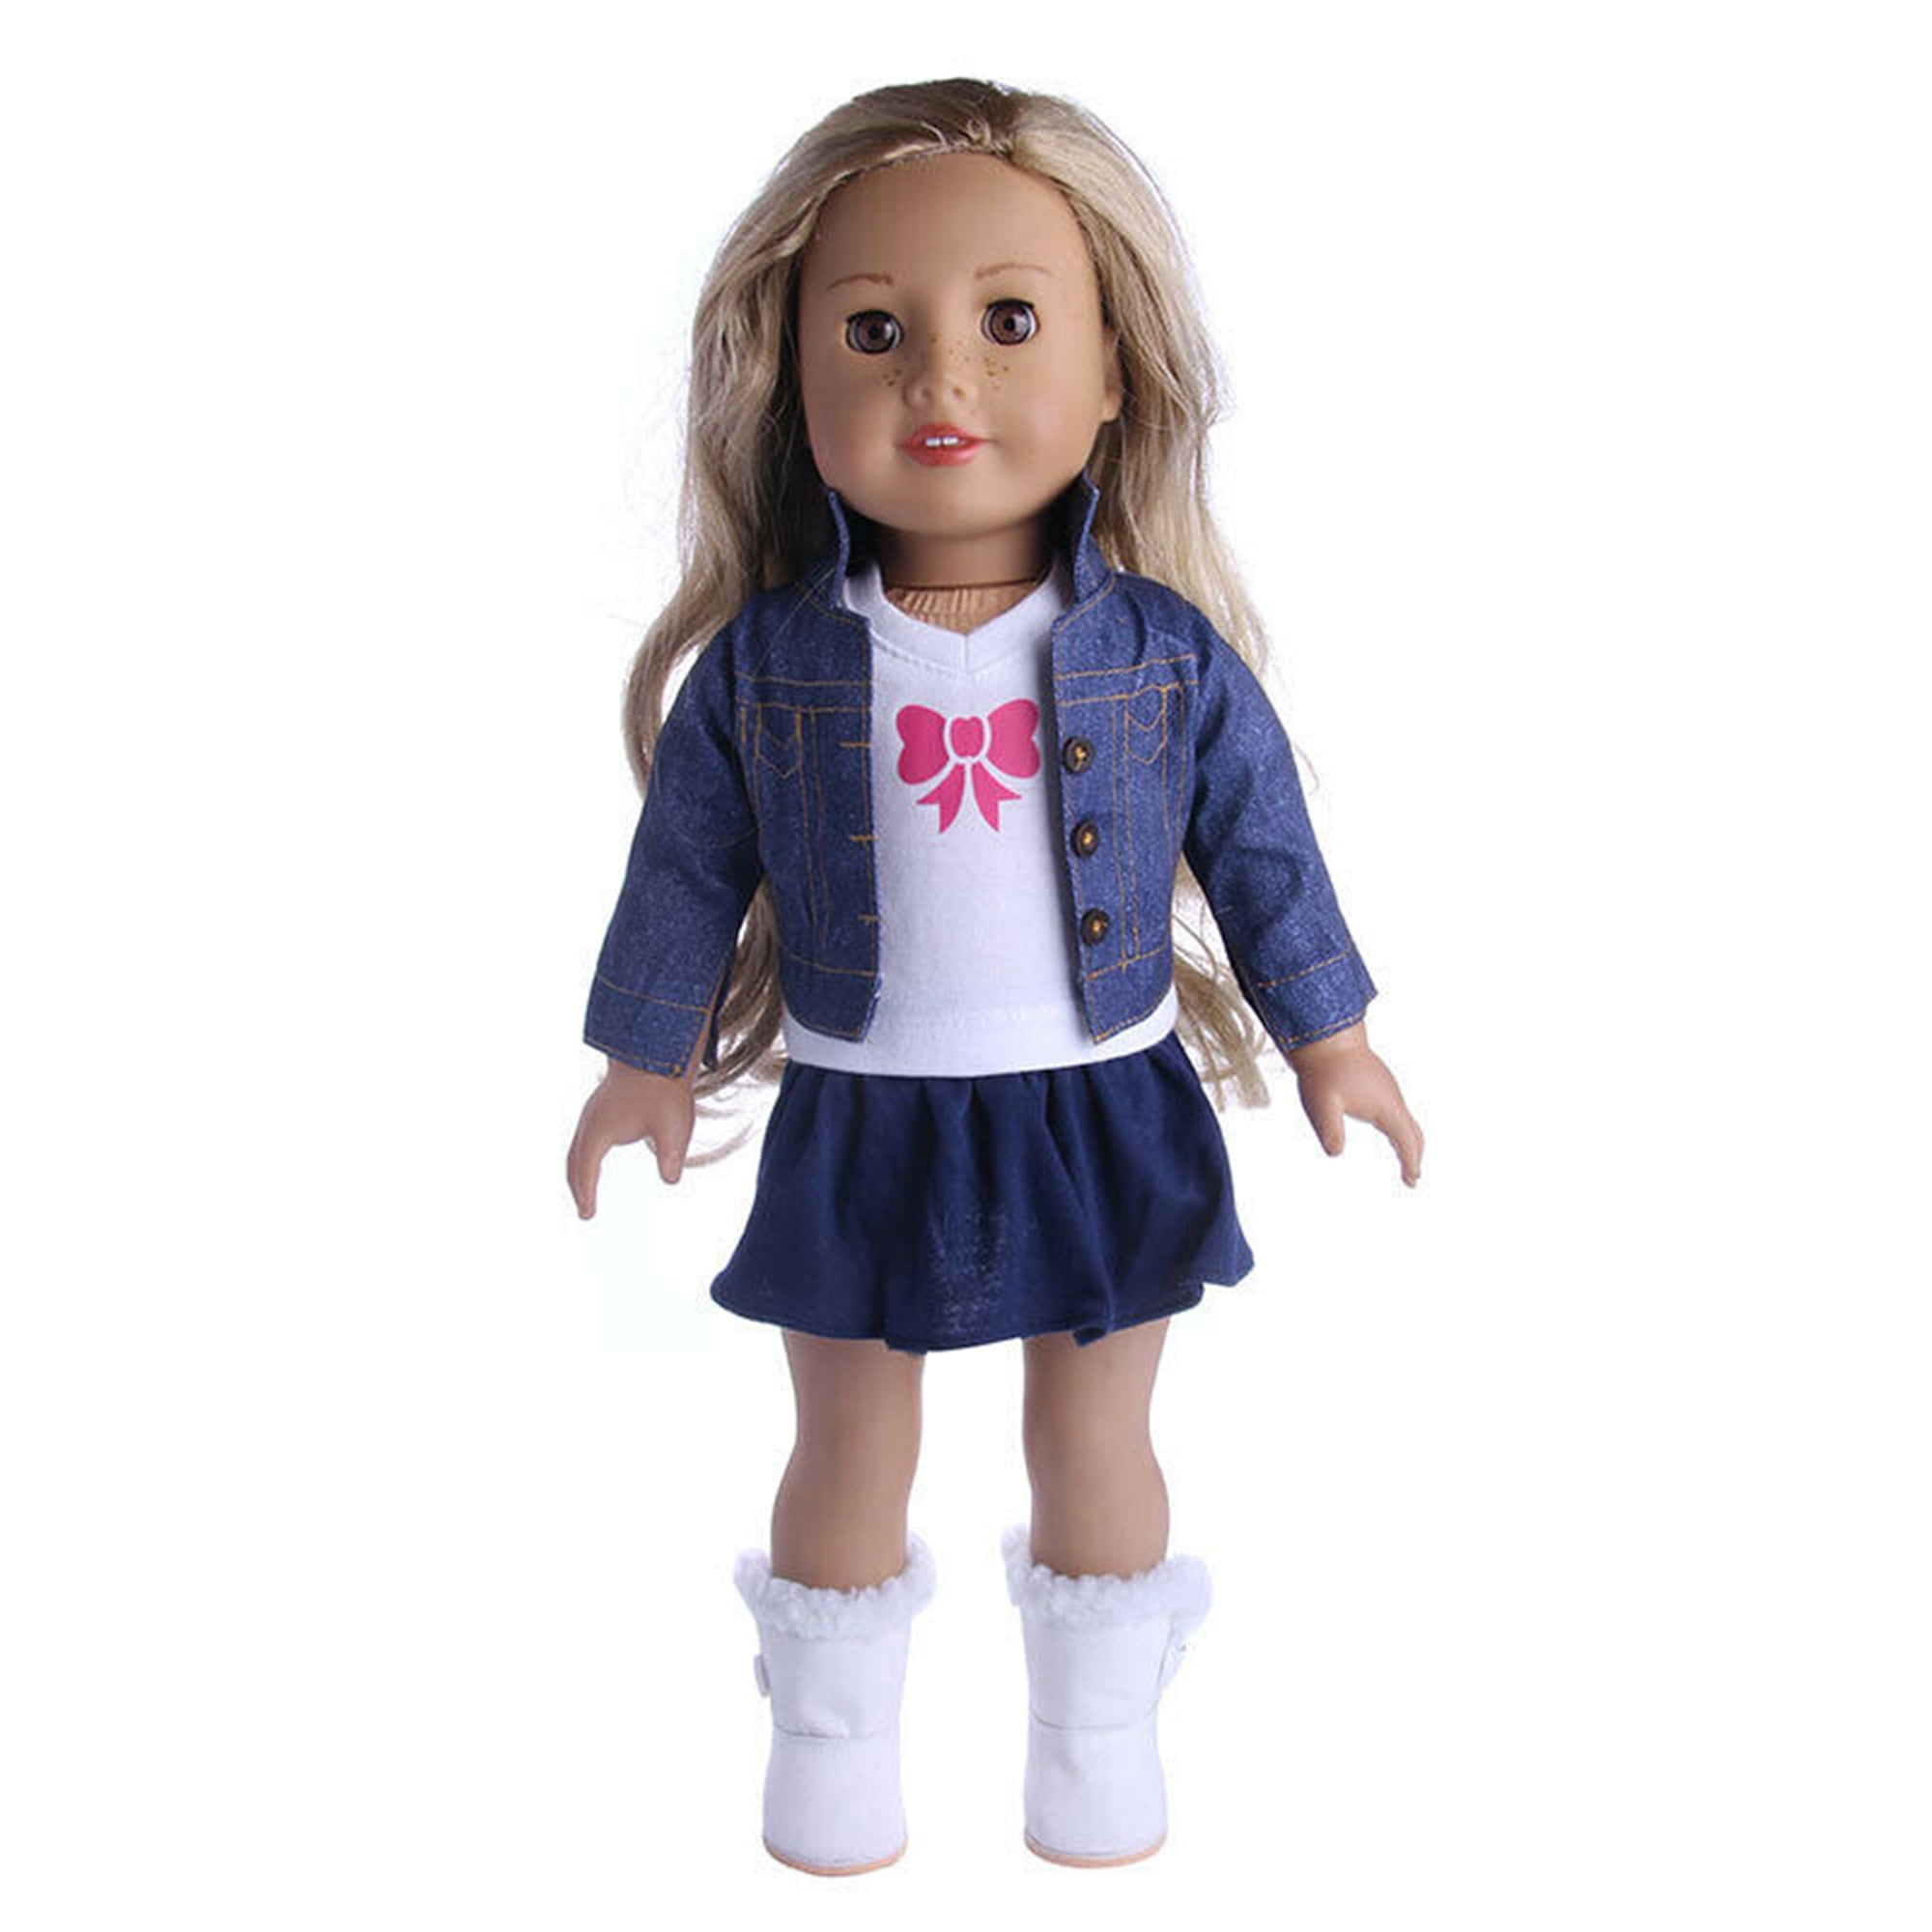 Handmade Doll Clothes Dress for 18inch Doll 43cm 18inch Dolls Overall Shoes  Dolls Kids Toys Doll Clothes Accessories Girl Gift Pink Blue Purple Play